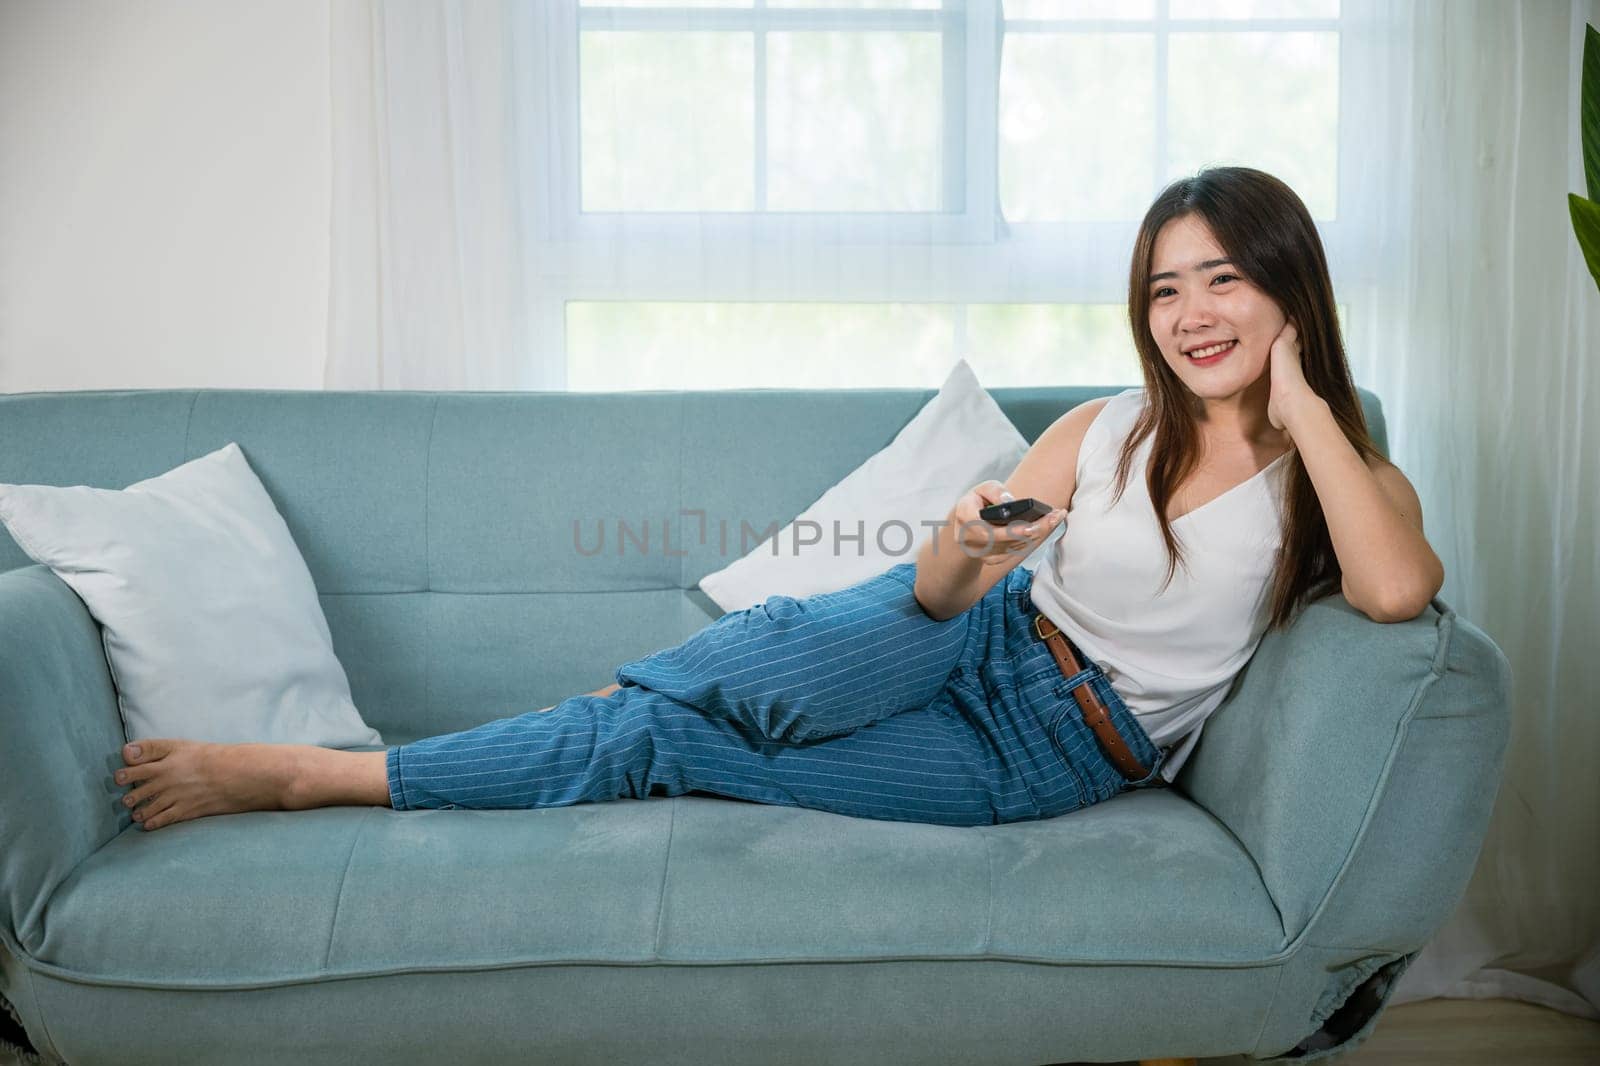 Asian young woman smiling sitting relax watch TV holding remote control on sofa in living room, Happy female fun movie holding remote watching television, Activity lifestyles concept